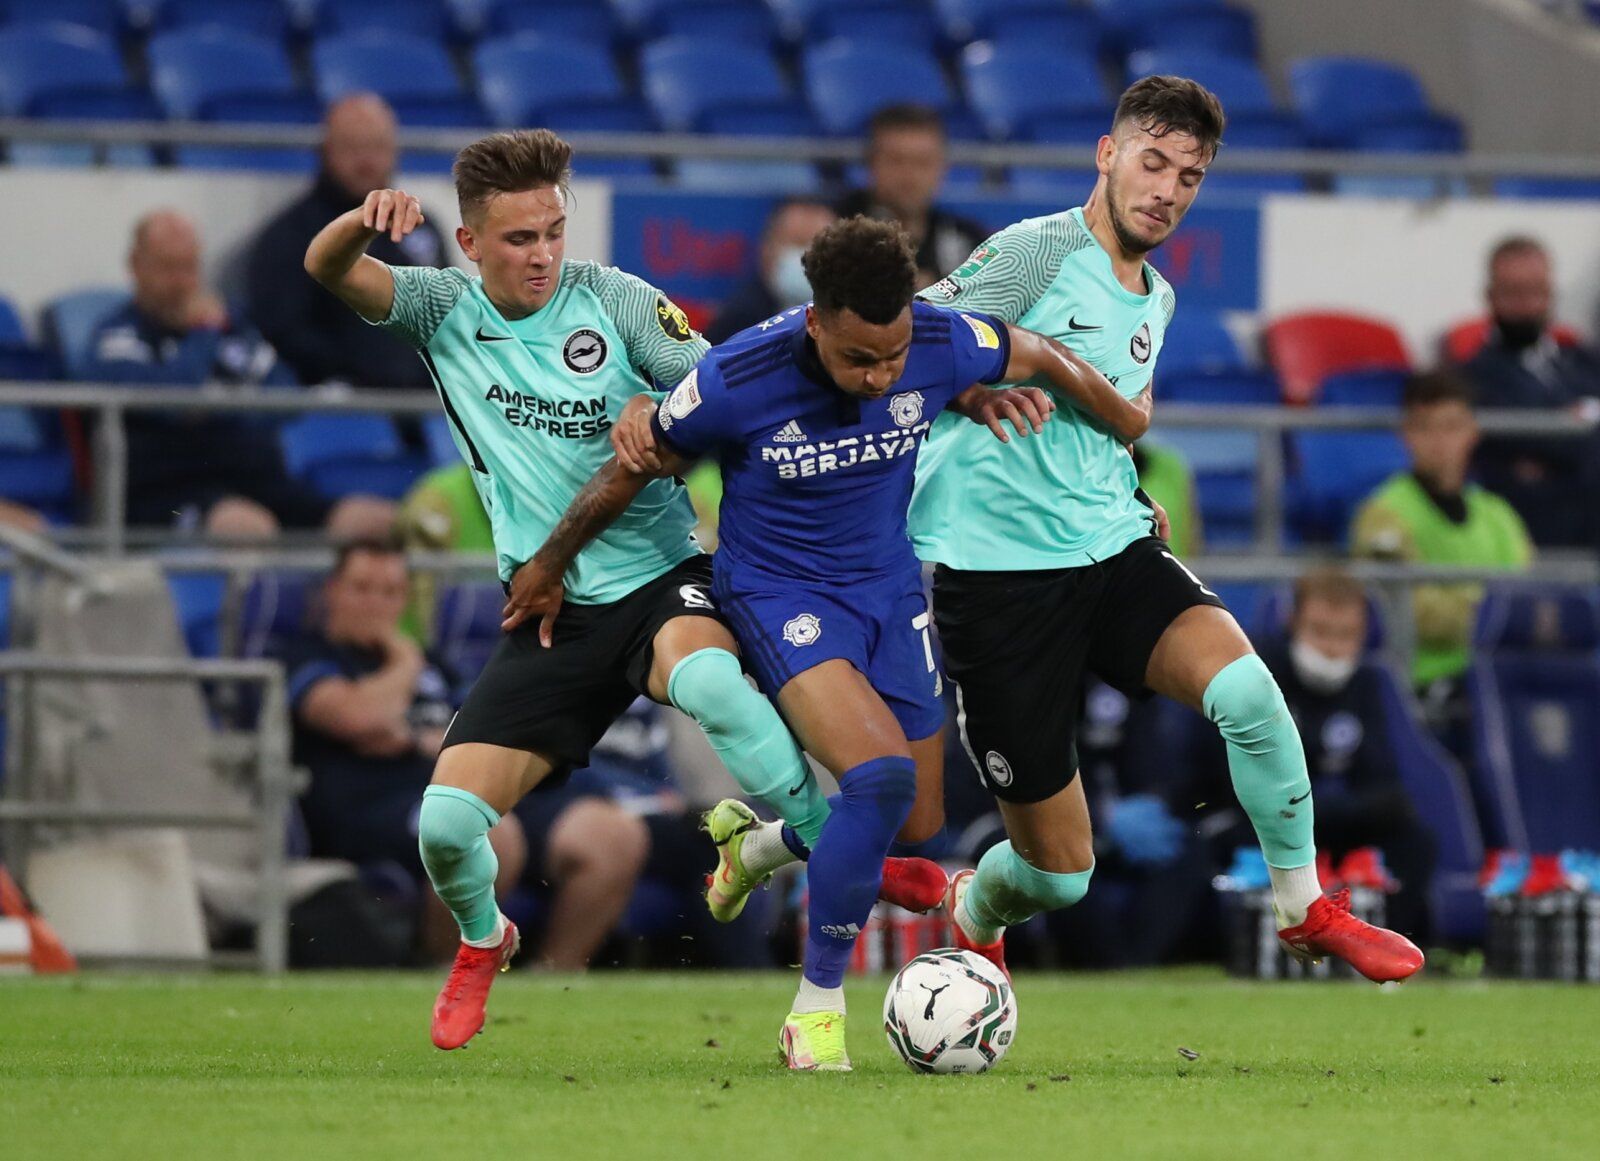 Soccer - England - Carabao Cup Second Round - Cardiff City v Brighton &amp; Hove Albion - Cardiff City Stadium, Cardiff, Britain - August 24, 2021 Cardiff City's Josh Murphy in action with Brighton &amp; Hove Albion's Michal Karbownik and Jakub Moder Action Images via Reuters/Peter Cziborra